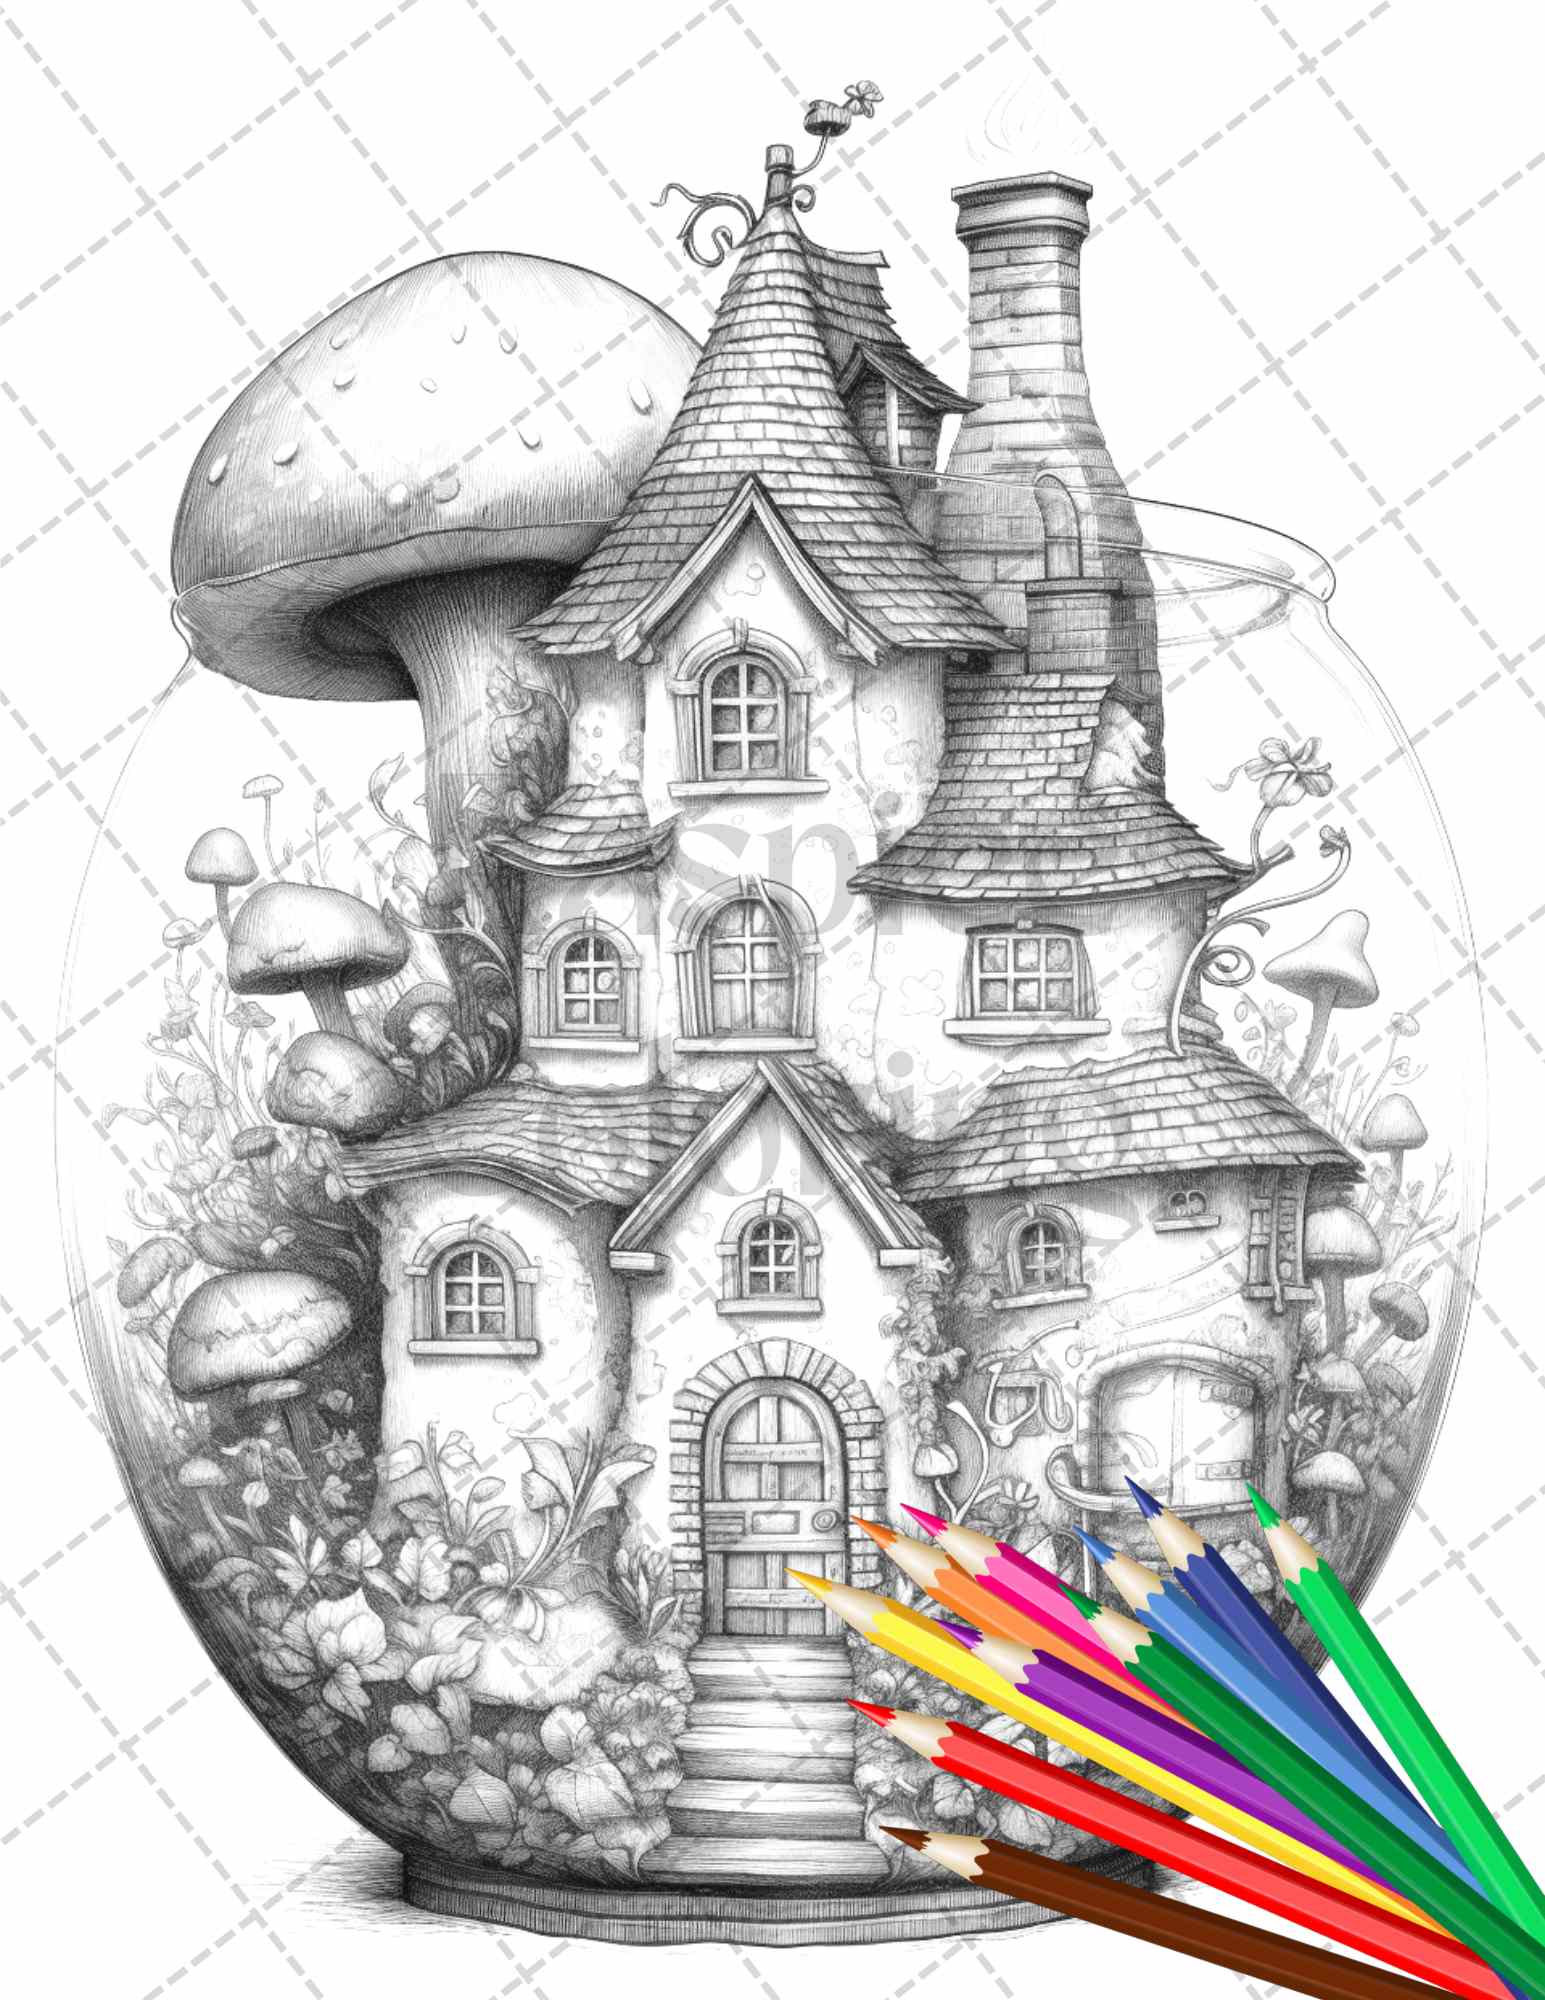 Fairy House in Jar Grayscale Coloring Pages Printable for Adults, PDF File Instant Download - raspiee